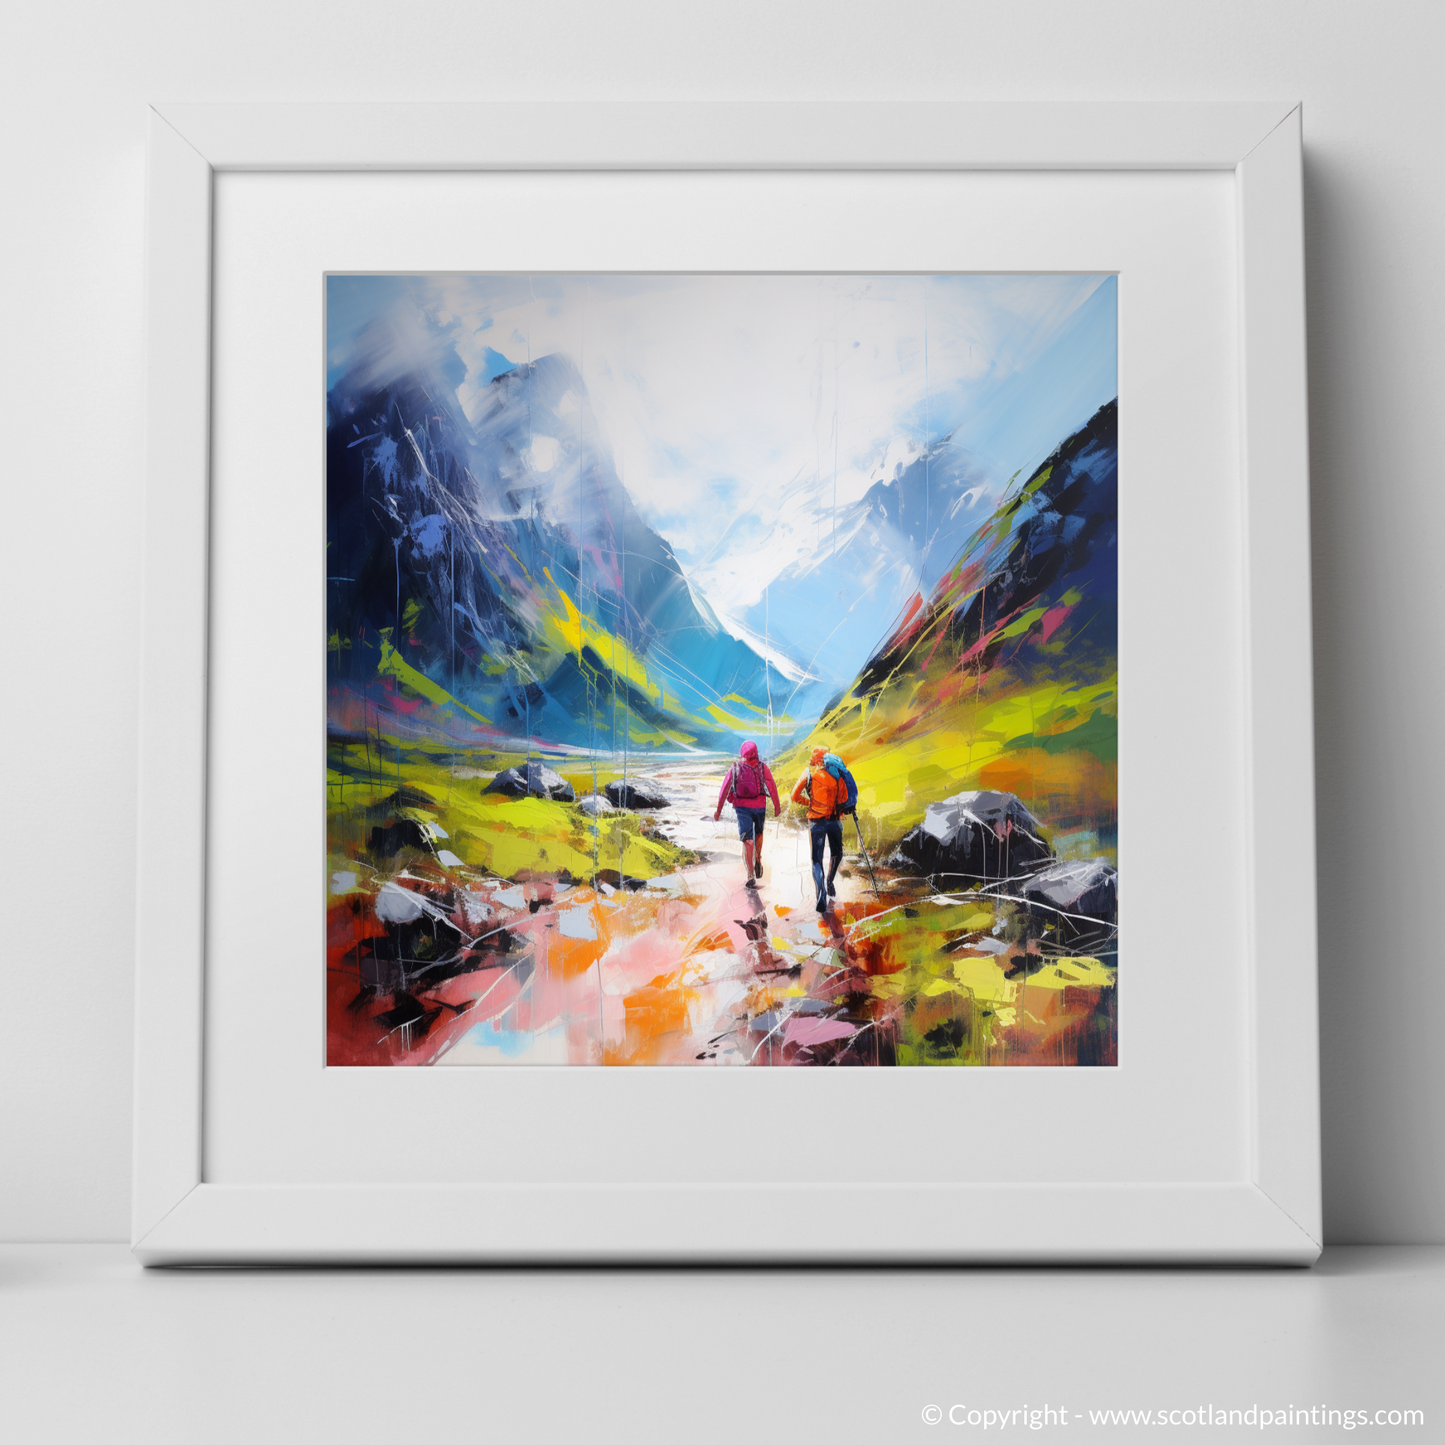 Hikers' Odyssey Through Abstract Glencoe